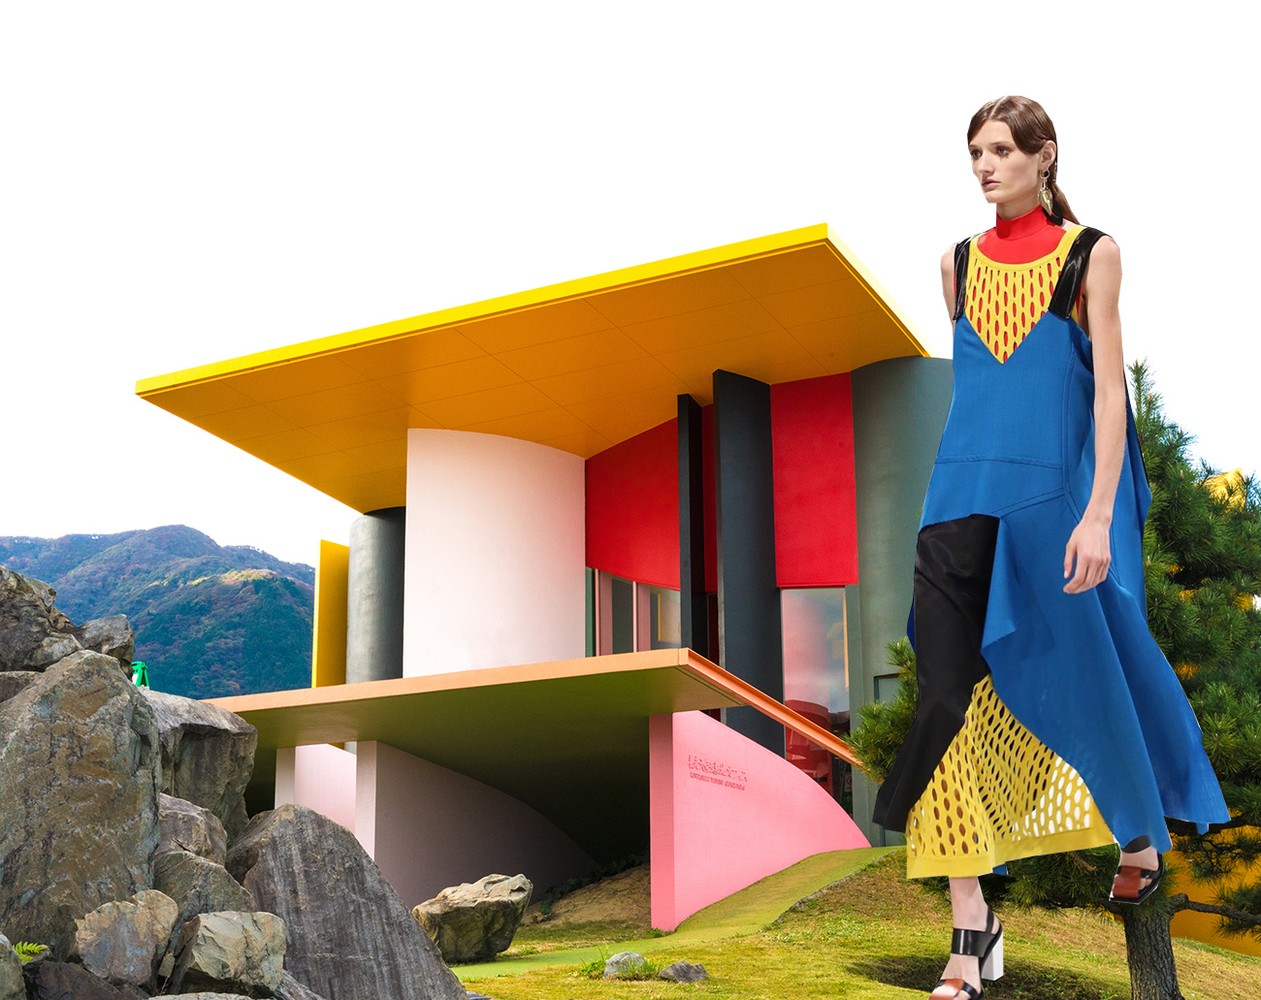 Architecture and Fashion: Design Crossovers and Collaborations